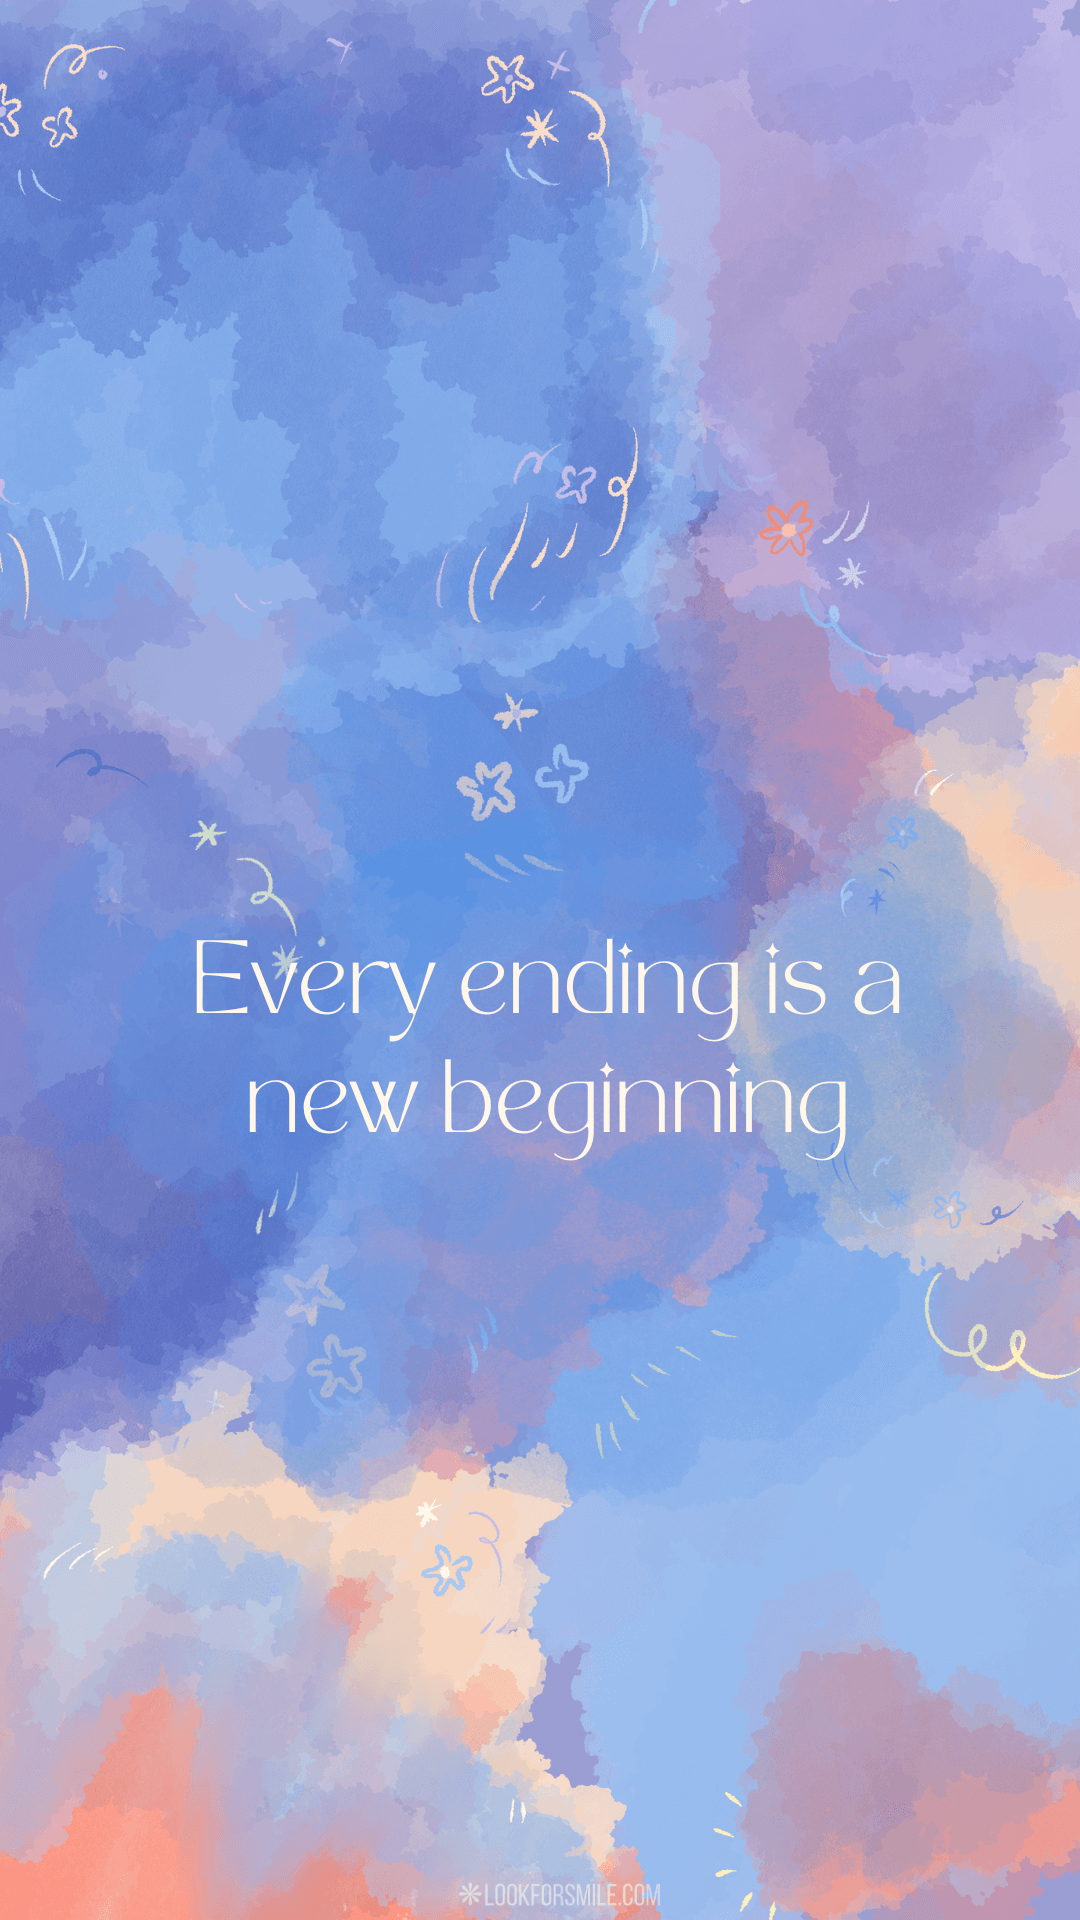 Every ending is a new beginning quote on blue and pink clouds – mobile wallpaper - Lookforsmile.com